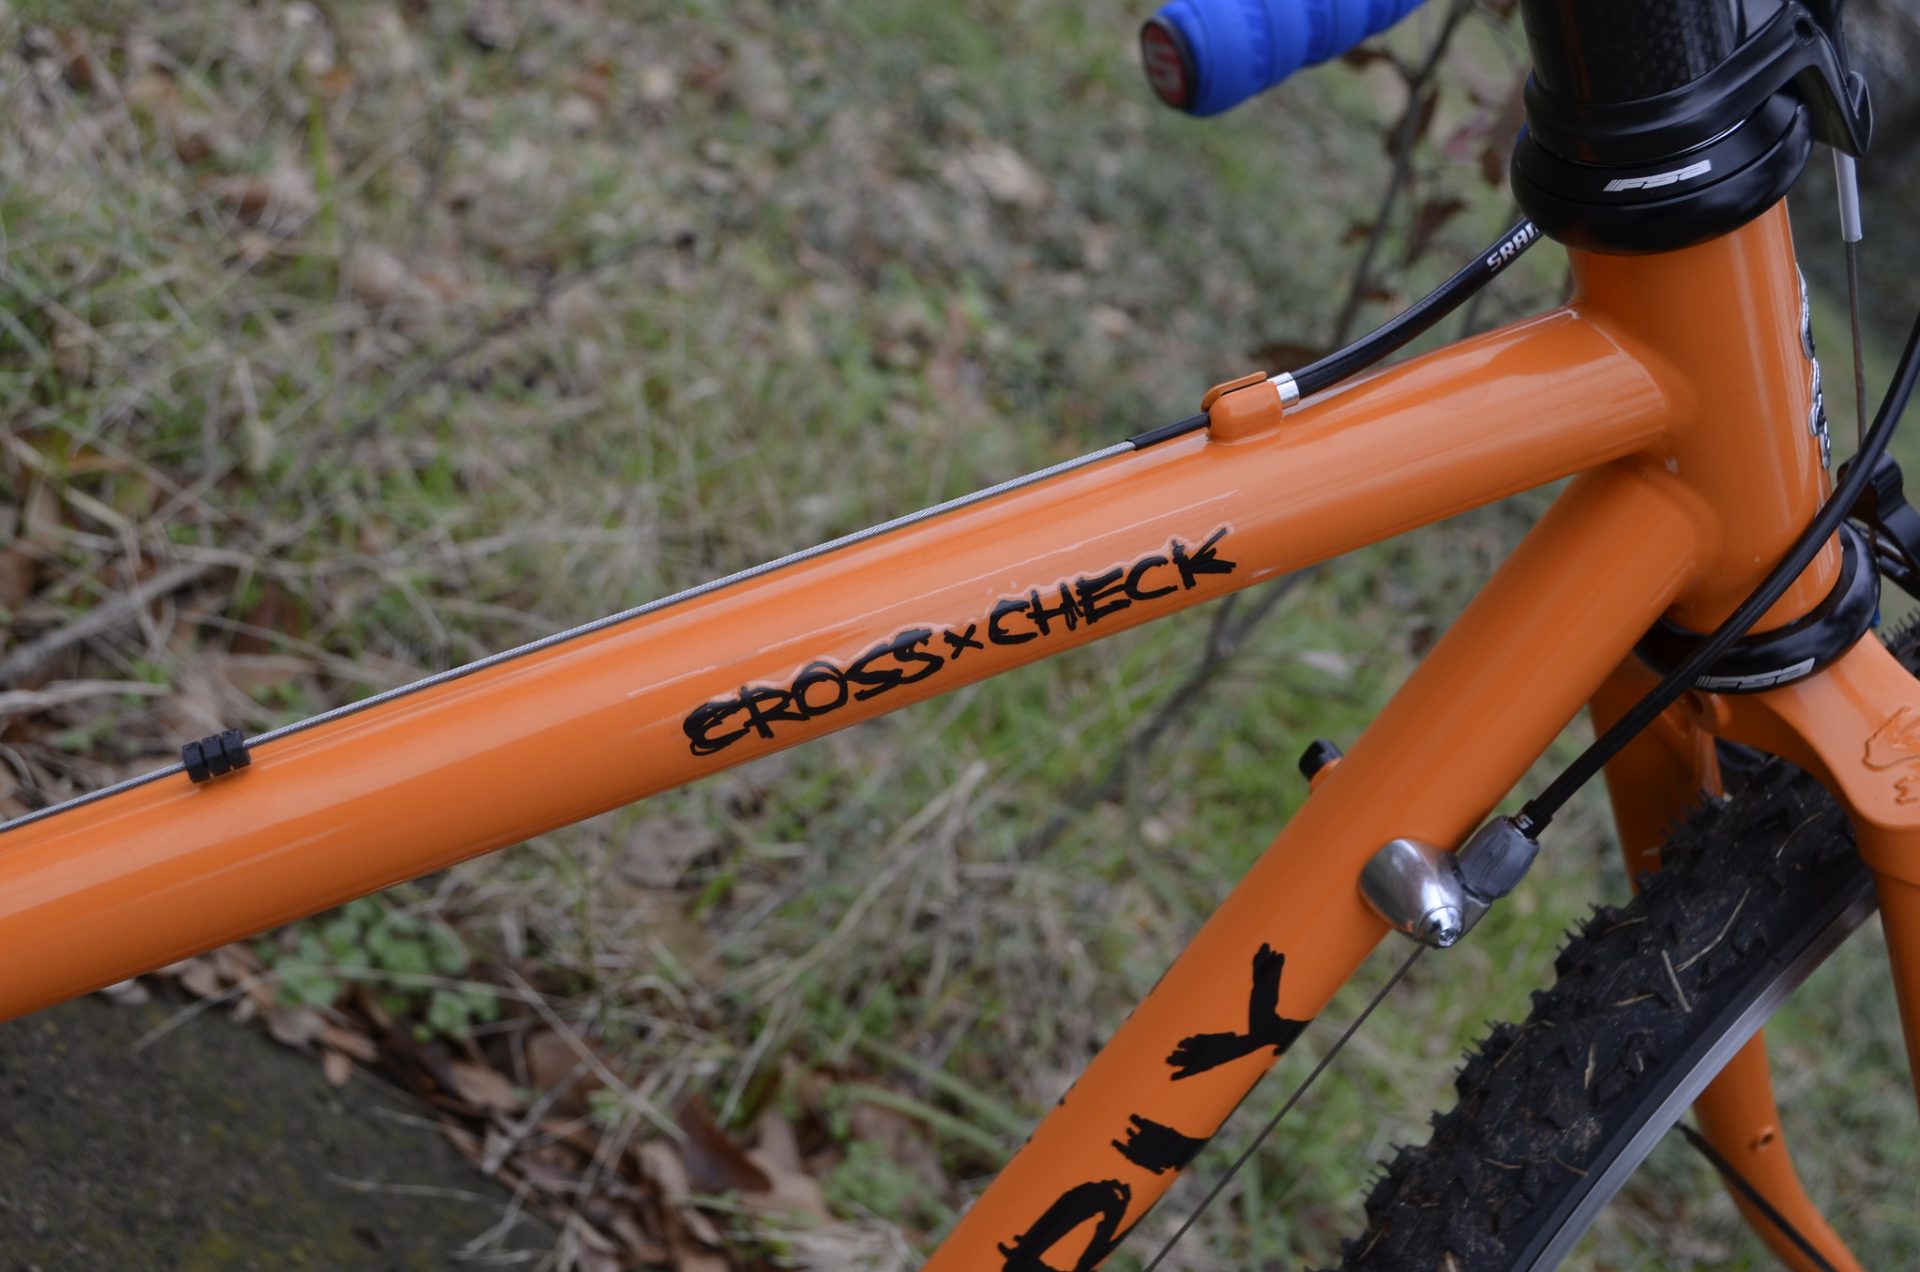 Detail shot of the top-tube of an Orange Surly Cross-check, showing the 'Cross-Check' logo. 